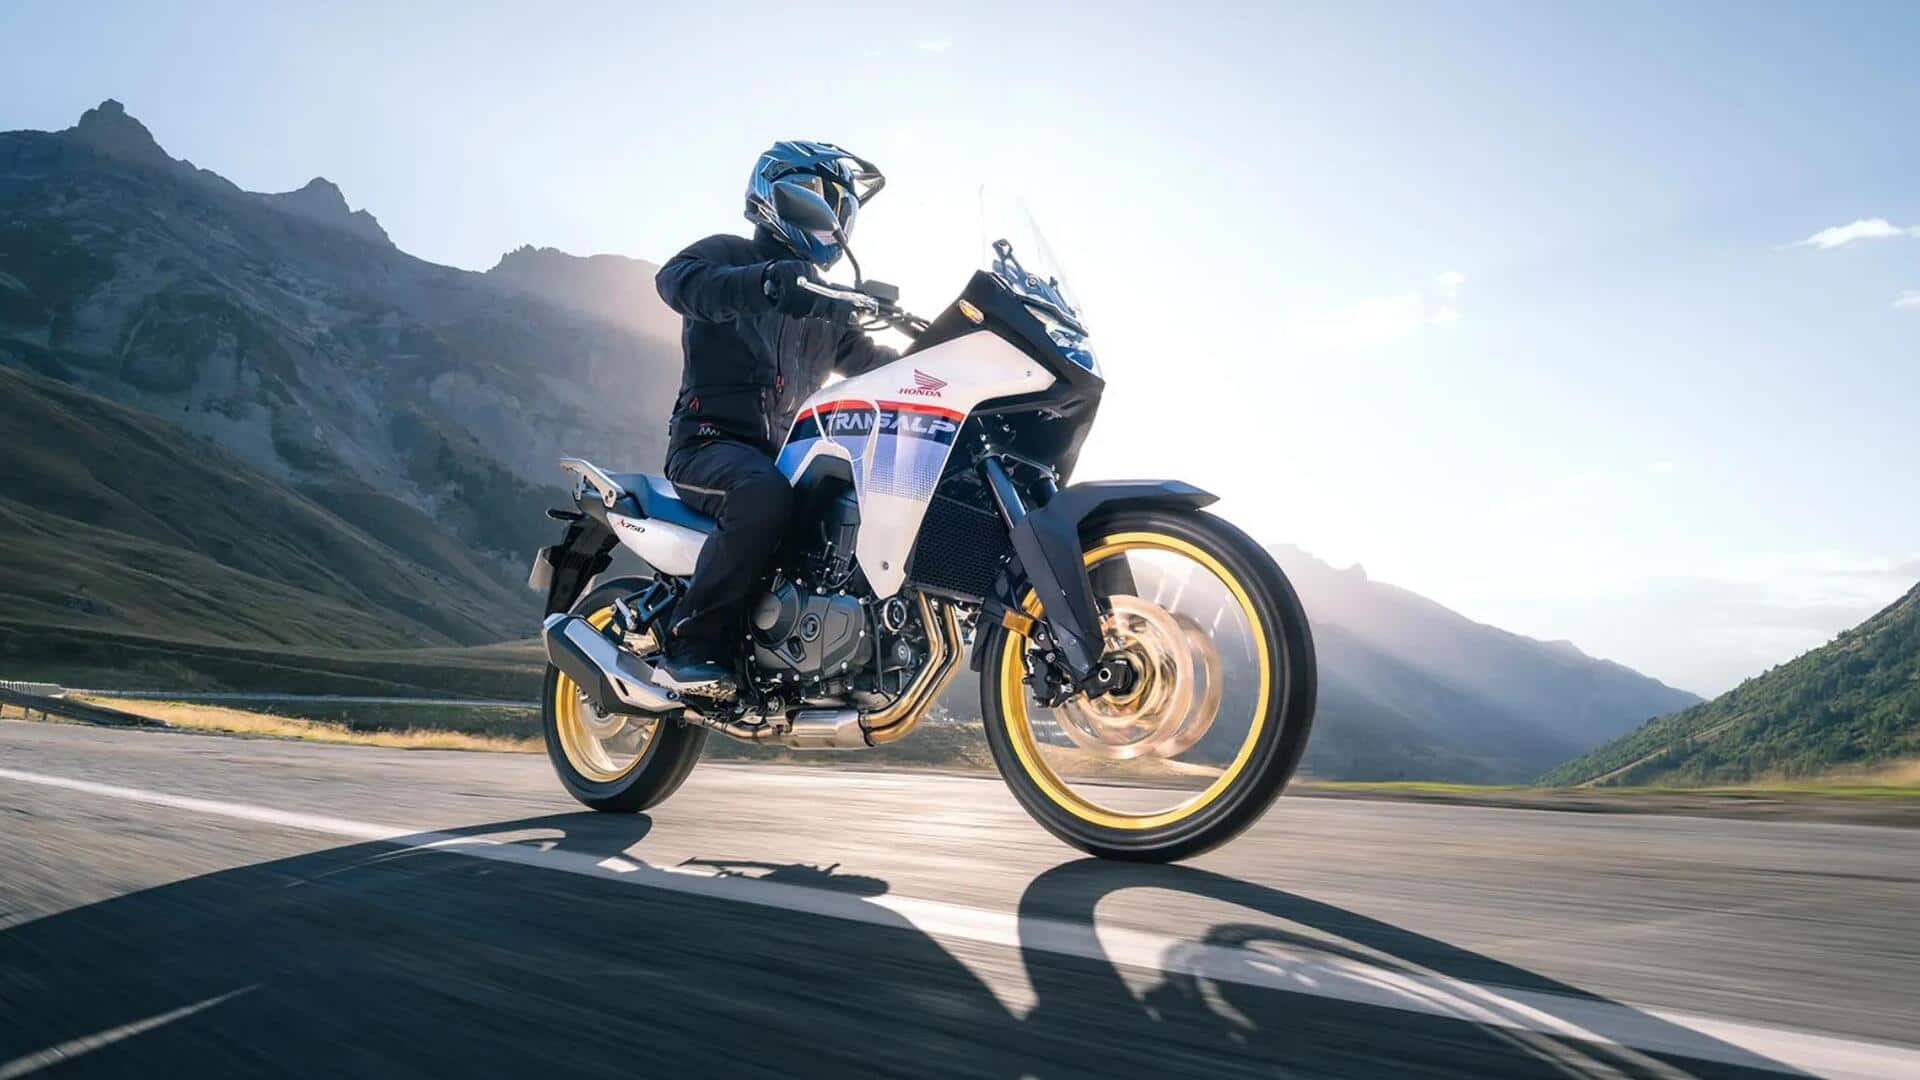 Honda Transalp 750 to arrive soon: Check out rivals